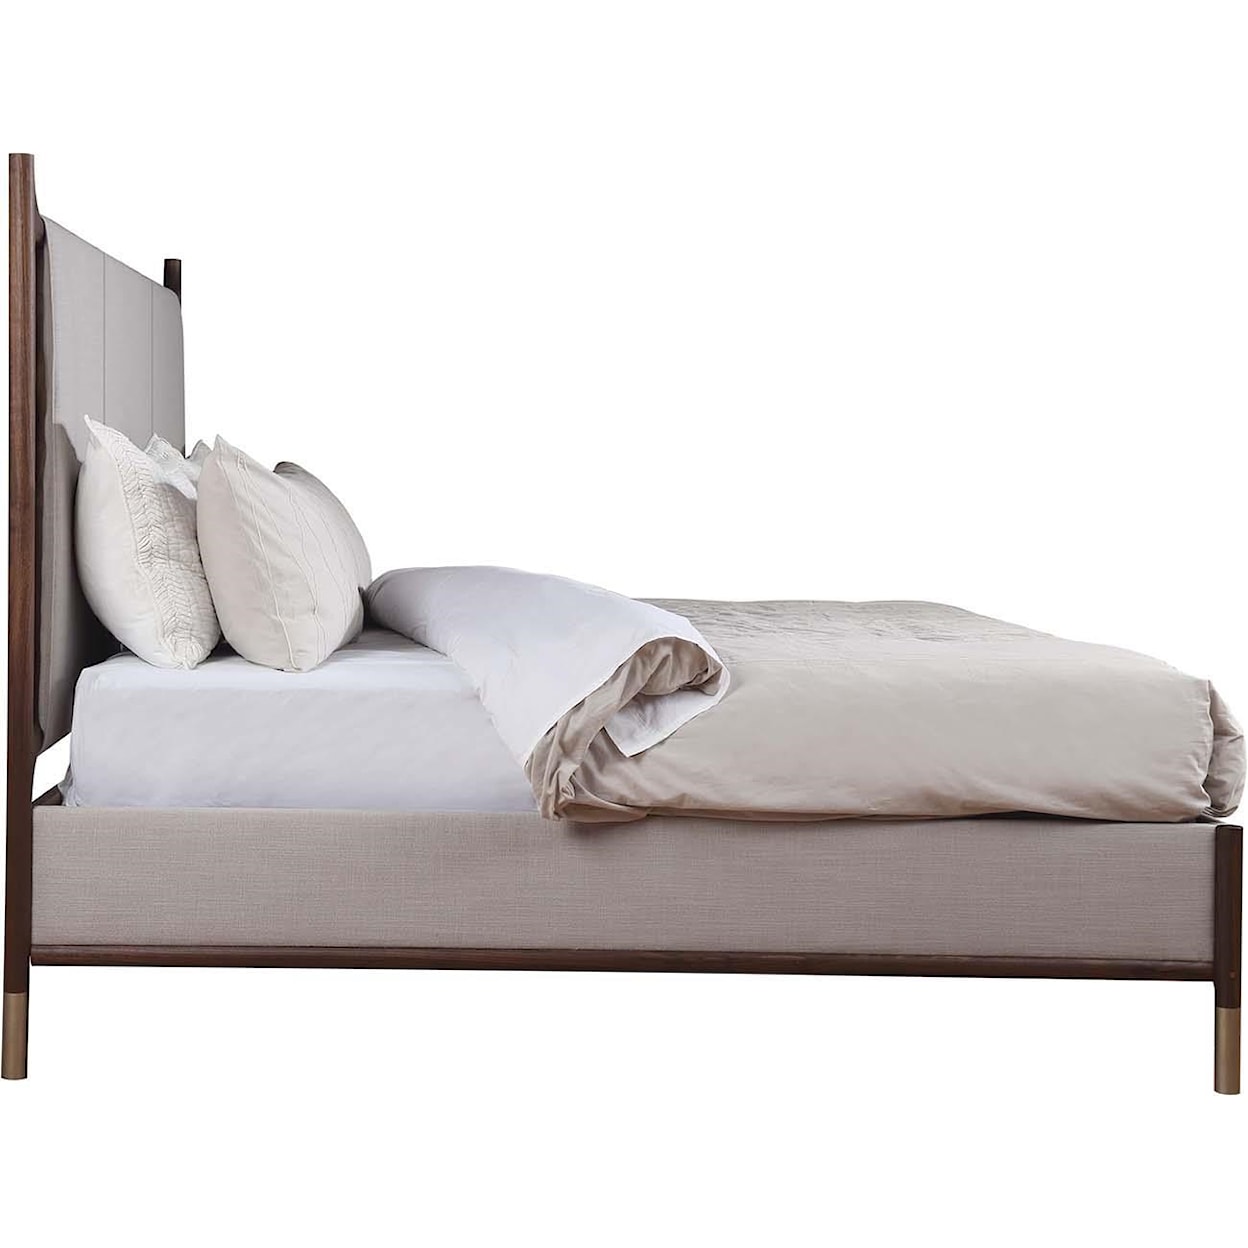 Stickley Walnut Grove Queen Crypton Fabric Upholstered Bed